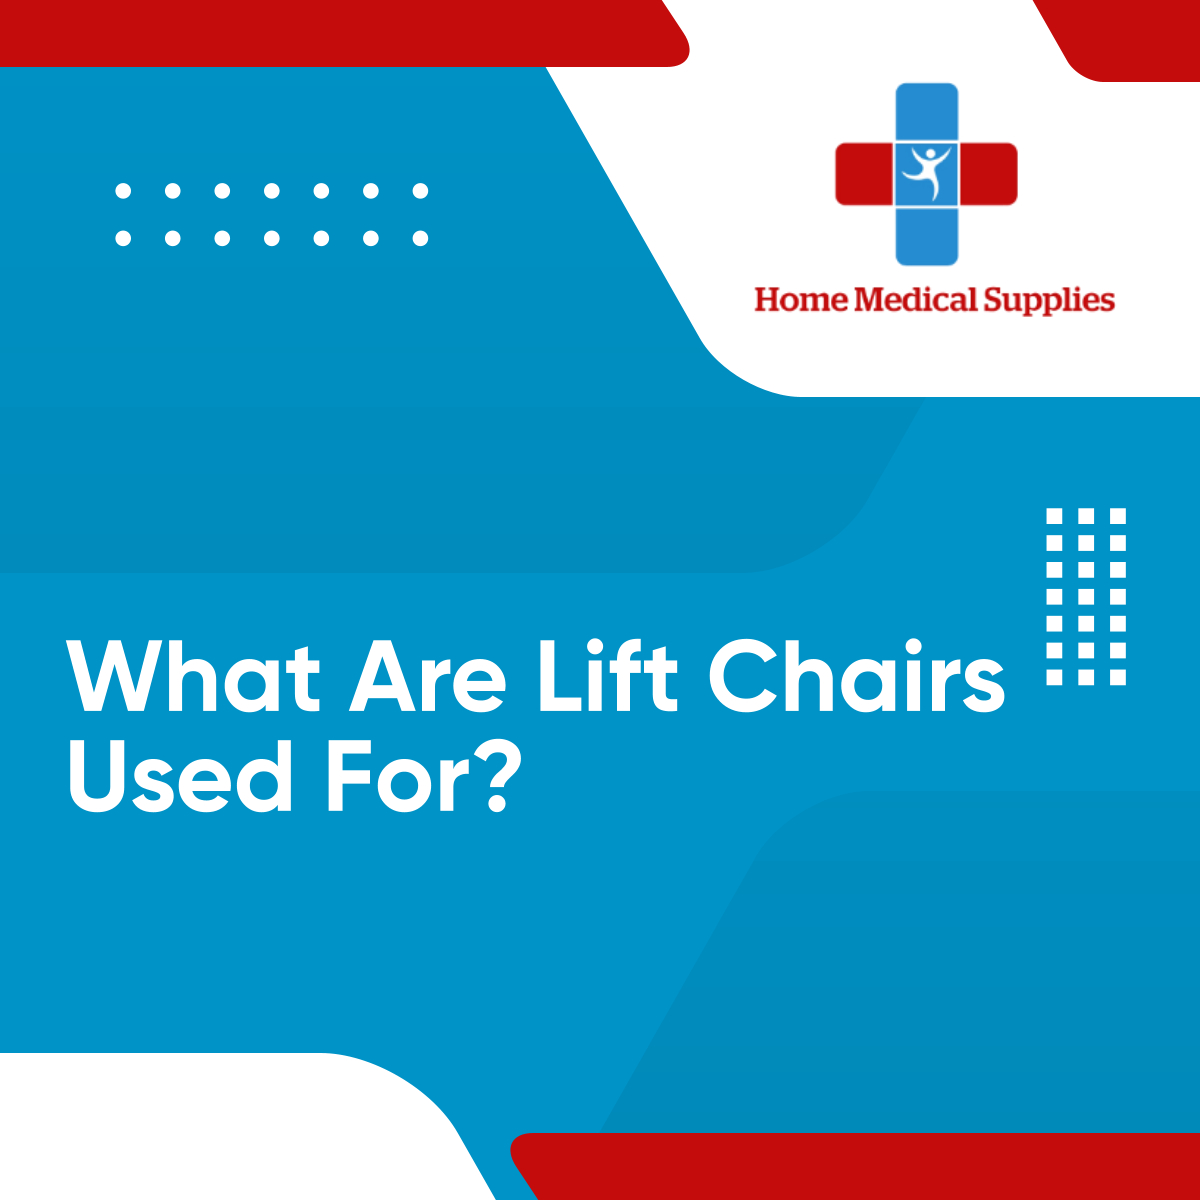 Lift chairs are motorized chairs that assist people in transitioning from a sitting to a standing position. They benefit those who are recuperating from surgery, have arthritis, or have a condition that impairs mobility. Call us for inquiries!

#LiftChairs #StoneyCreekON